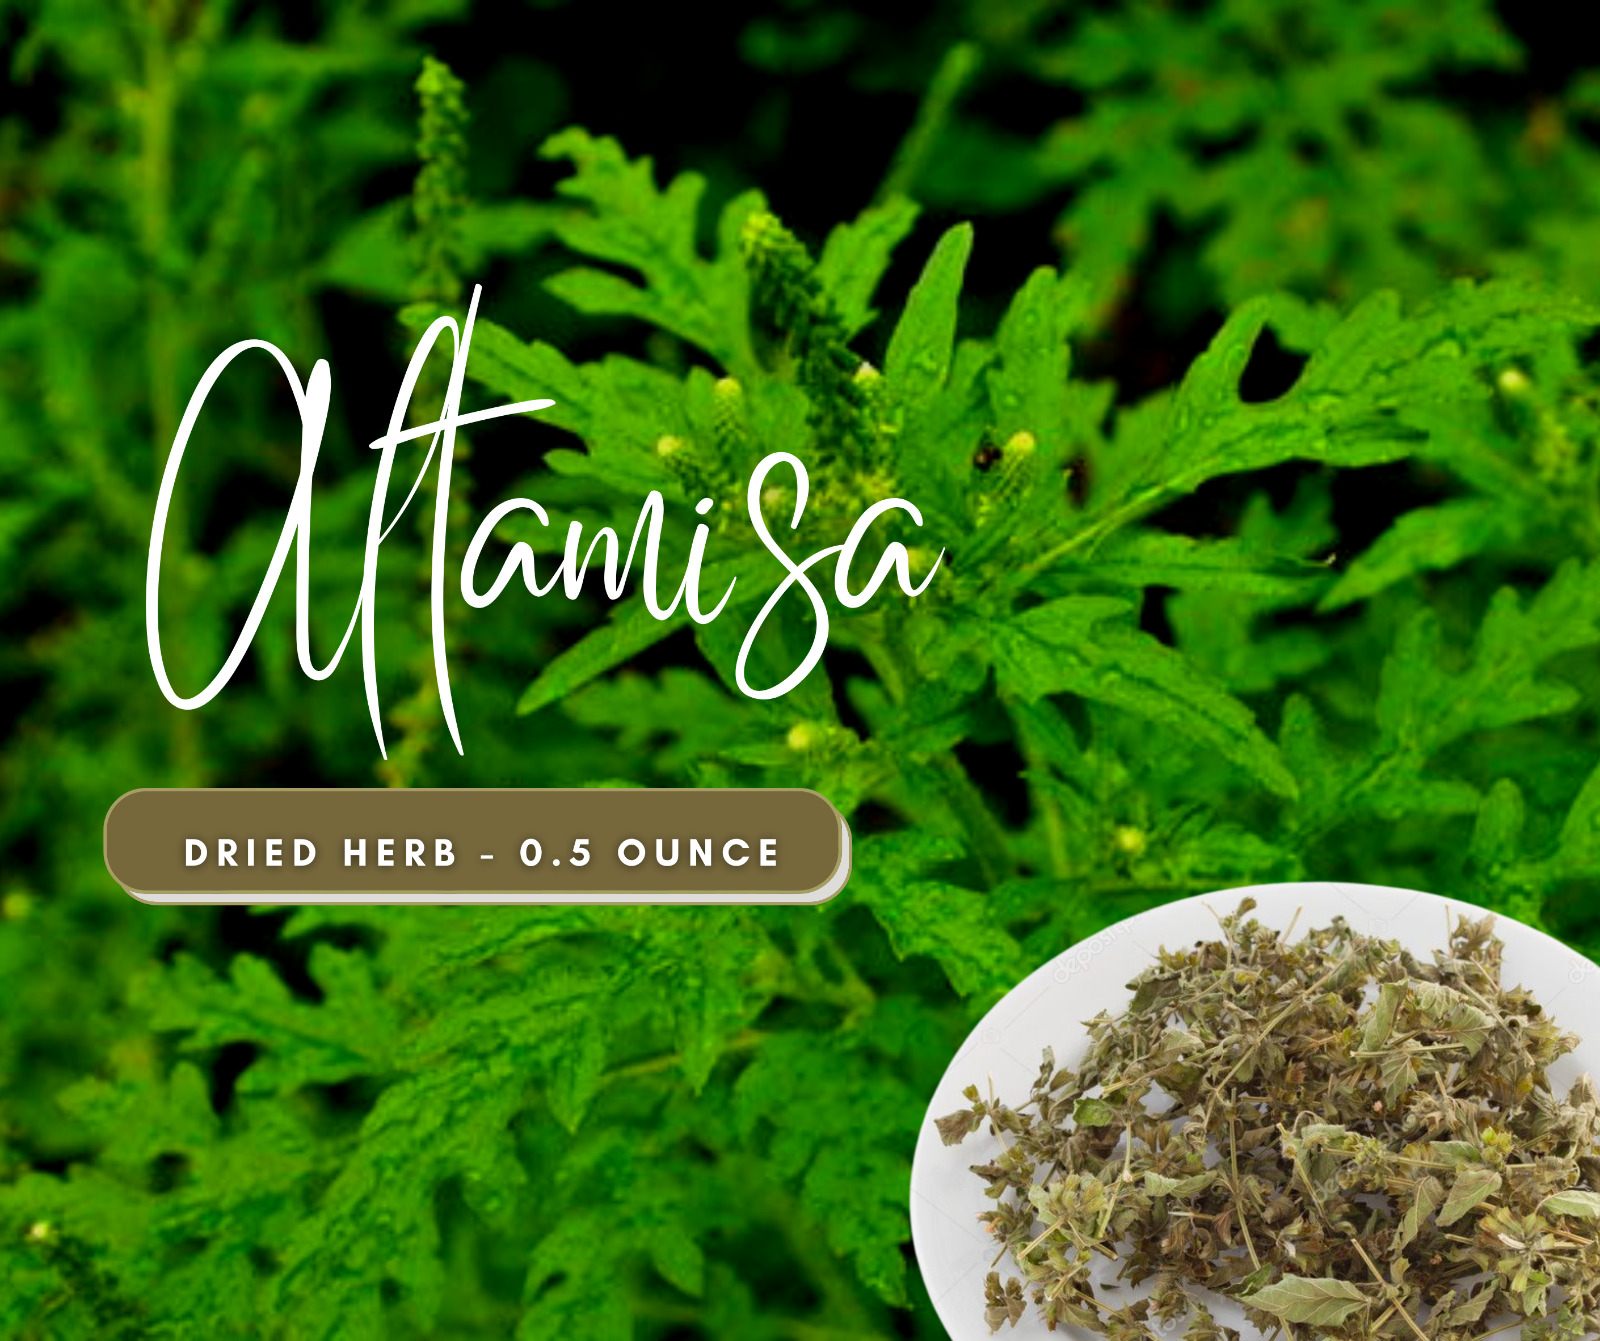 Altamisa LEGITIMATE Dried Herb - Remove Home Cleansing Herb - Boost Intuition 